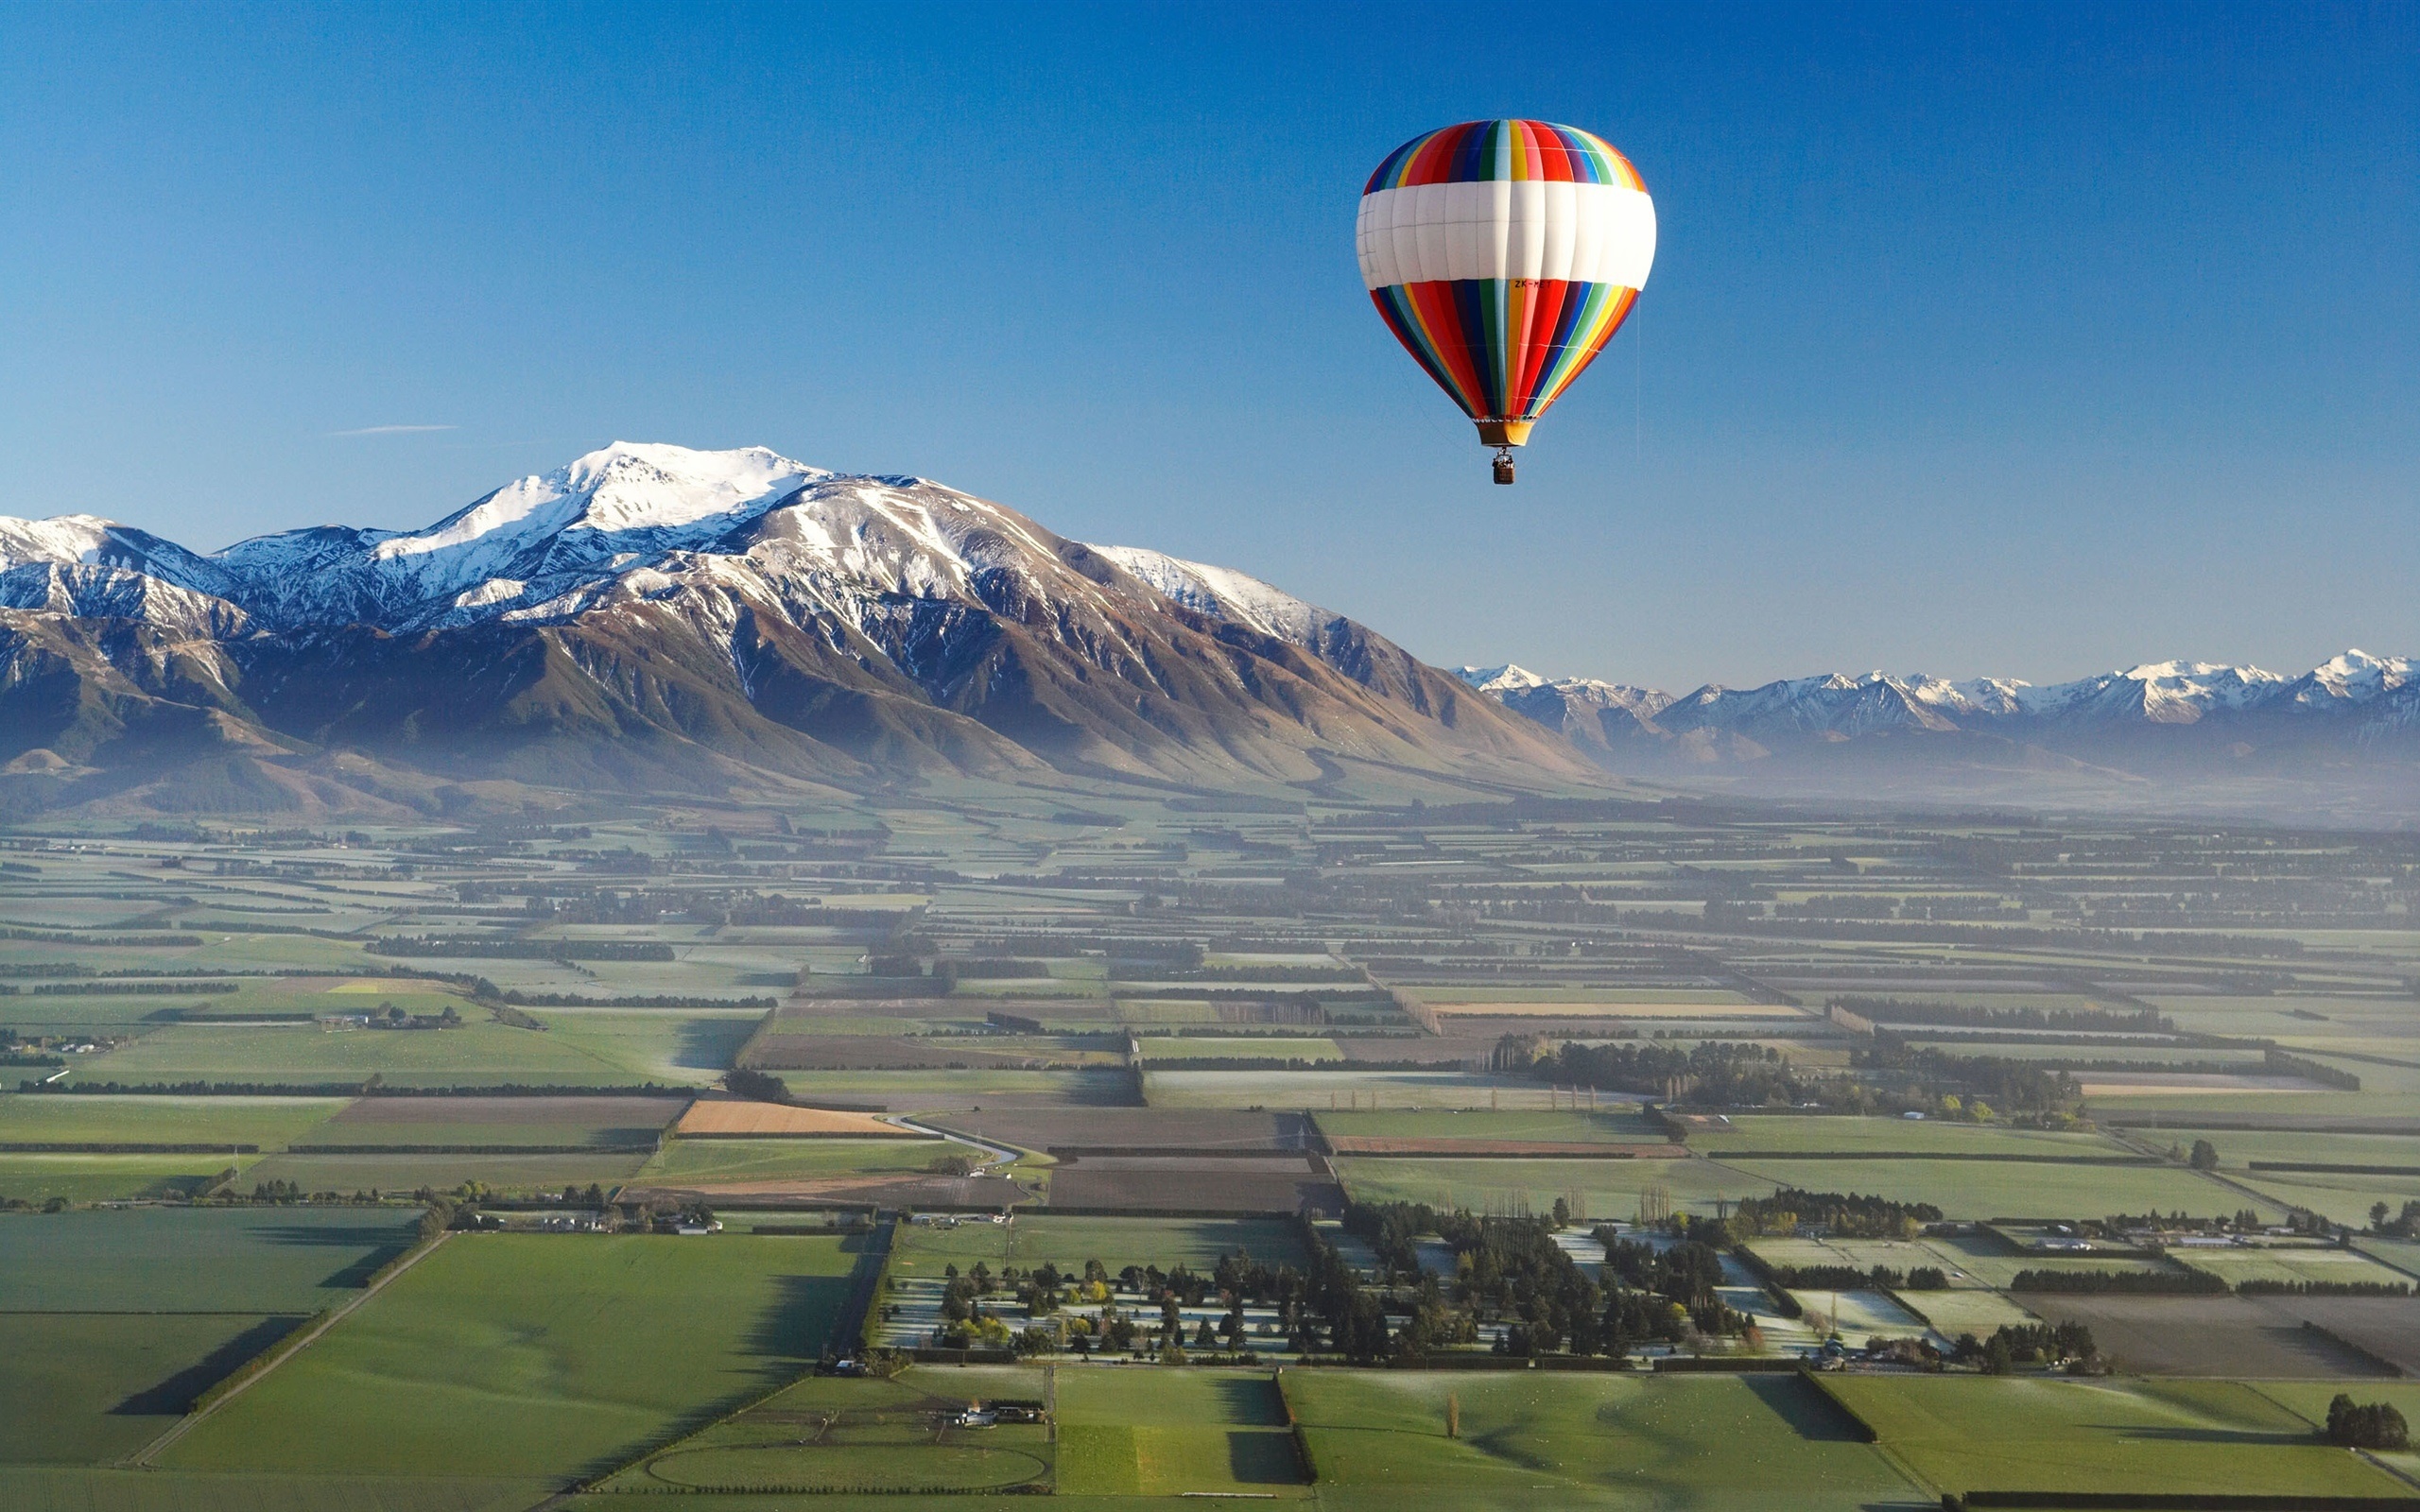 Air Sports: Balloon ride over the snow mountain chain and the village, Balloon travel. 2560x1600 HD Wallpaper.